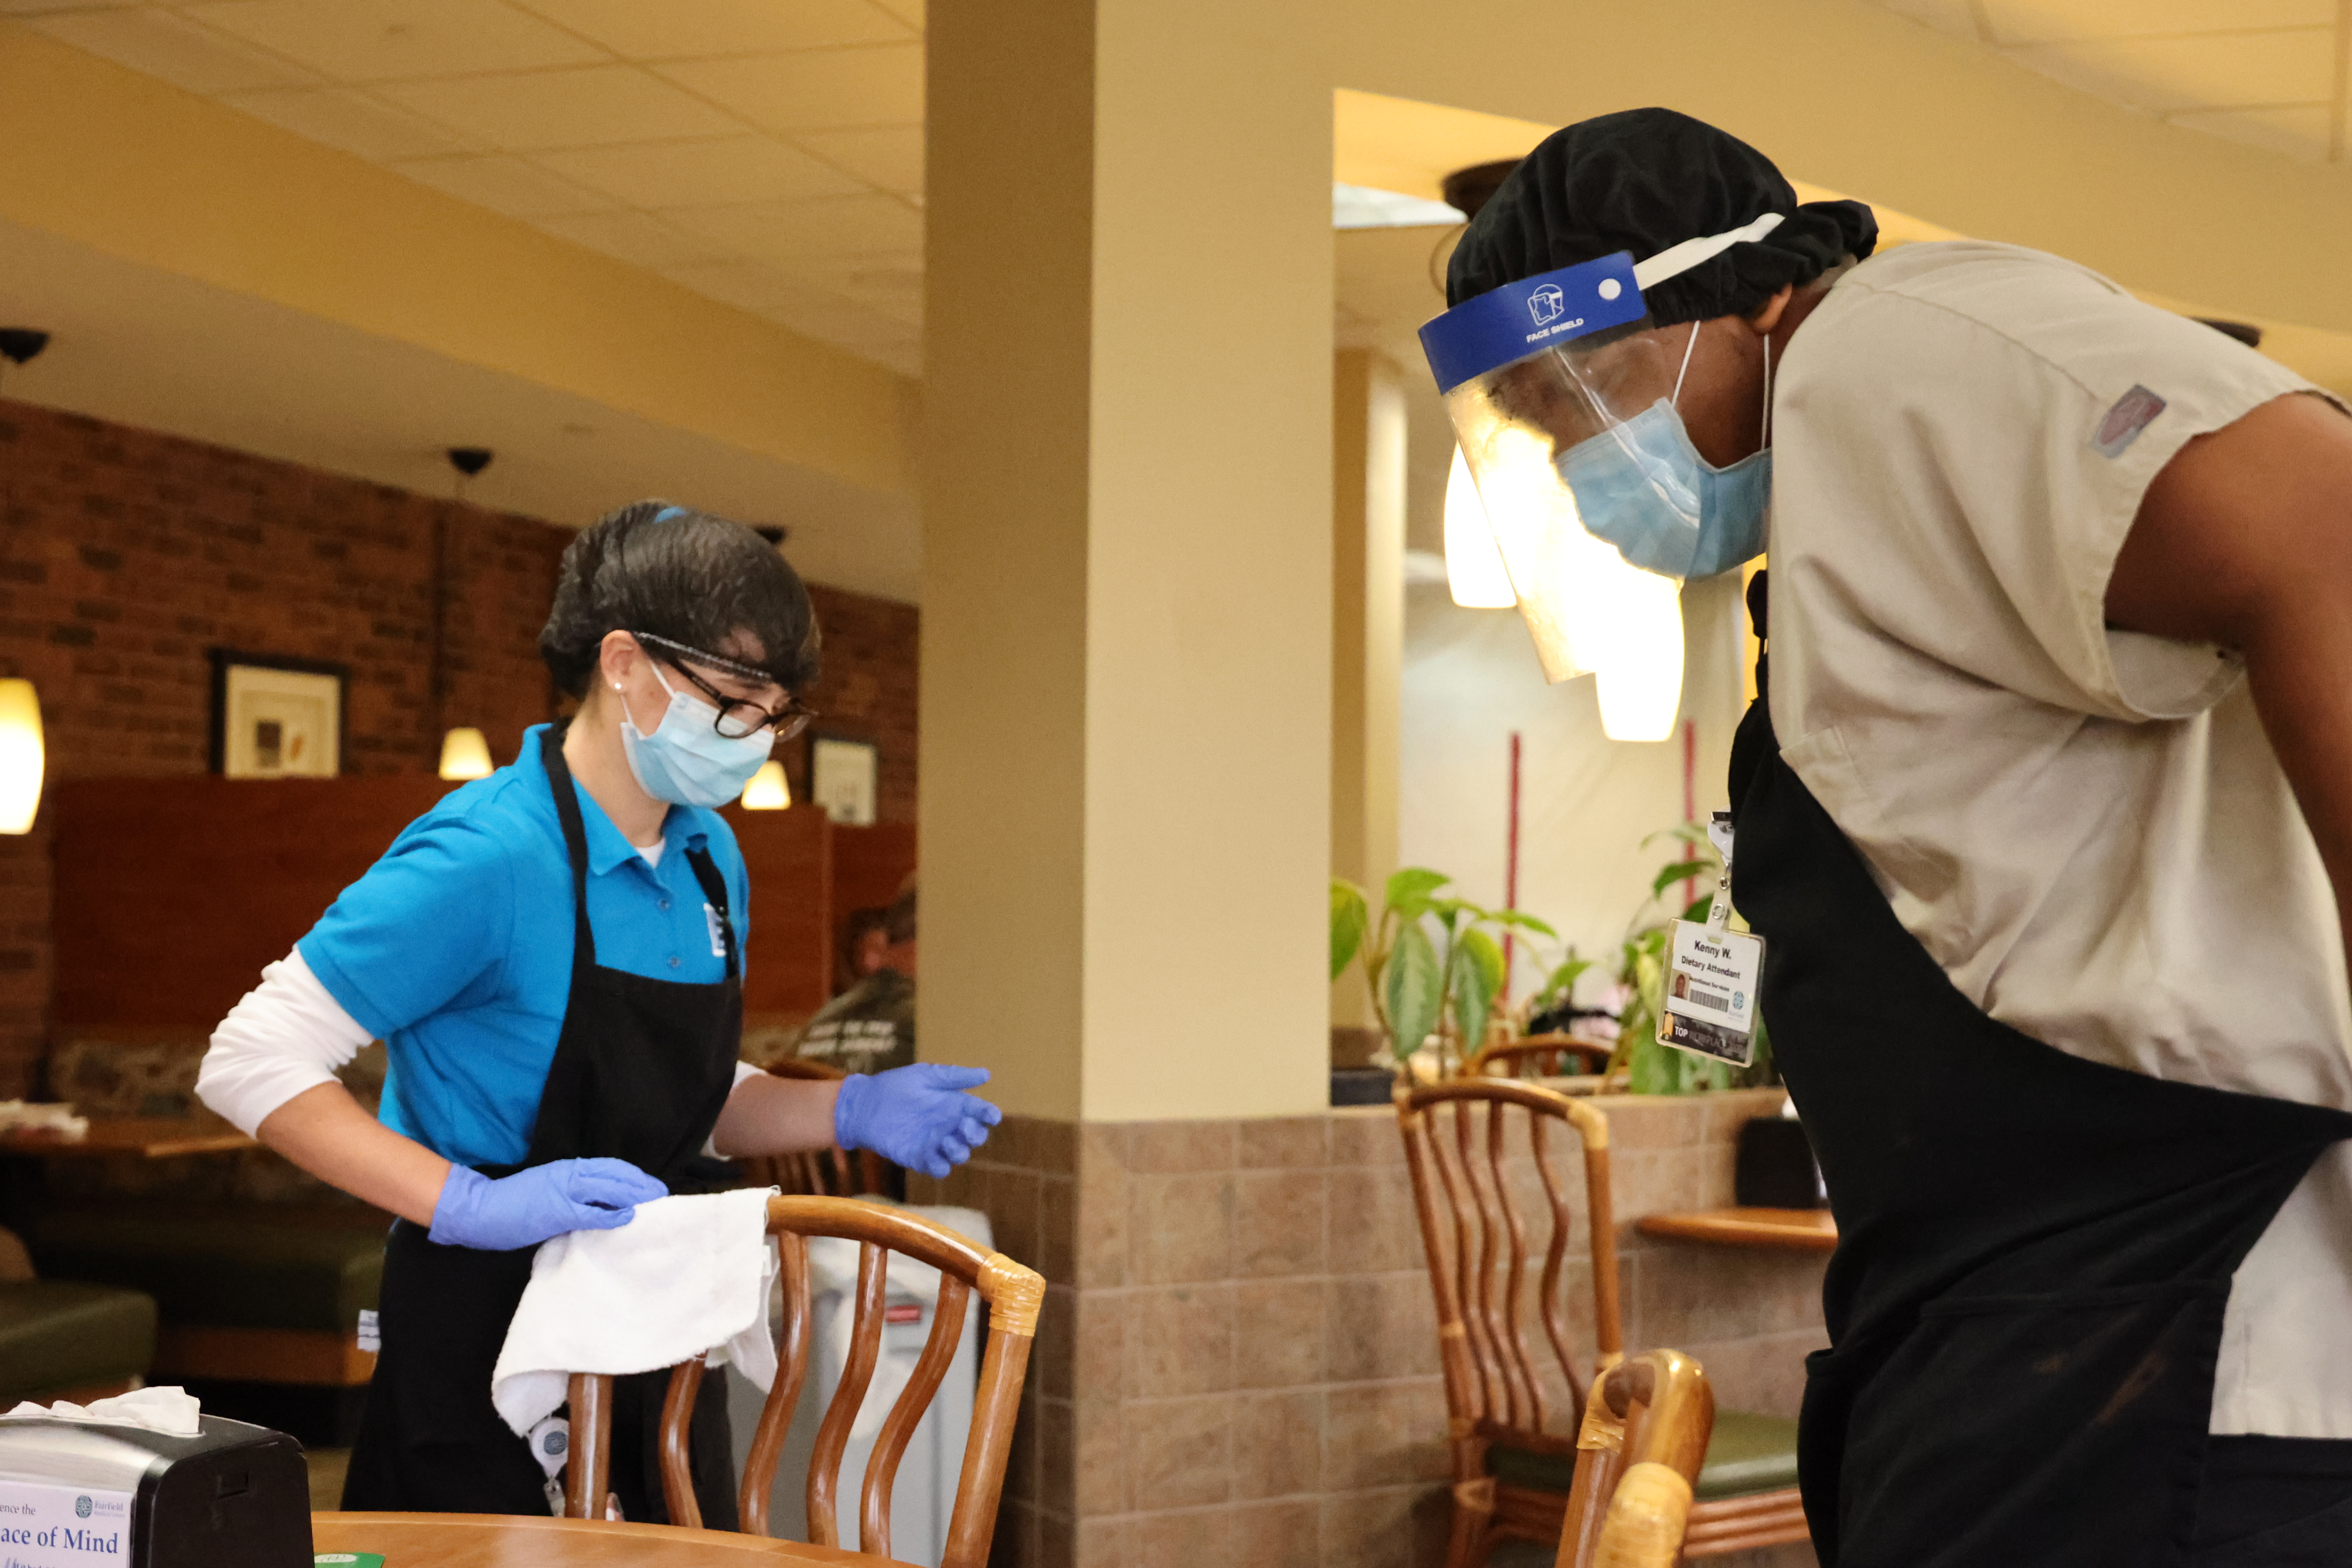 One current student and one alumnus of the Project SEARCH program work together to clean the FMC dining area.